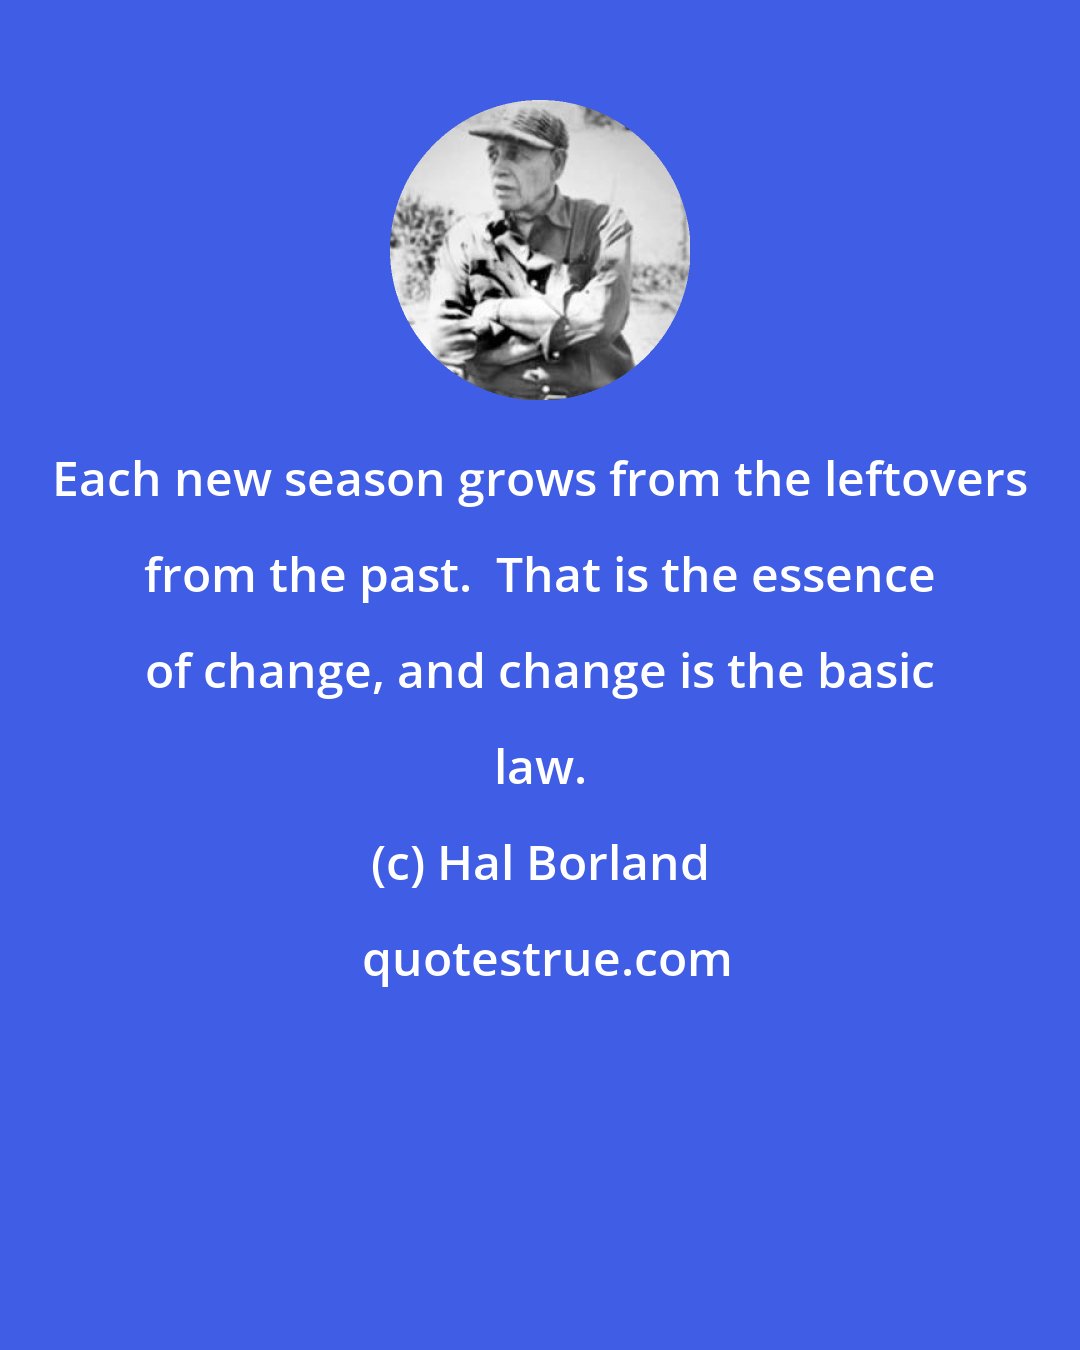 Hal Borland: Each new season grows from the leftovers from the past.  That is the essence of change, and change is the basic law.